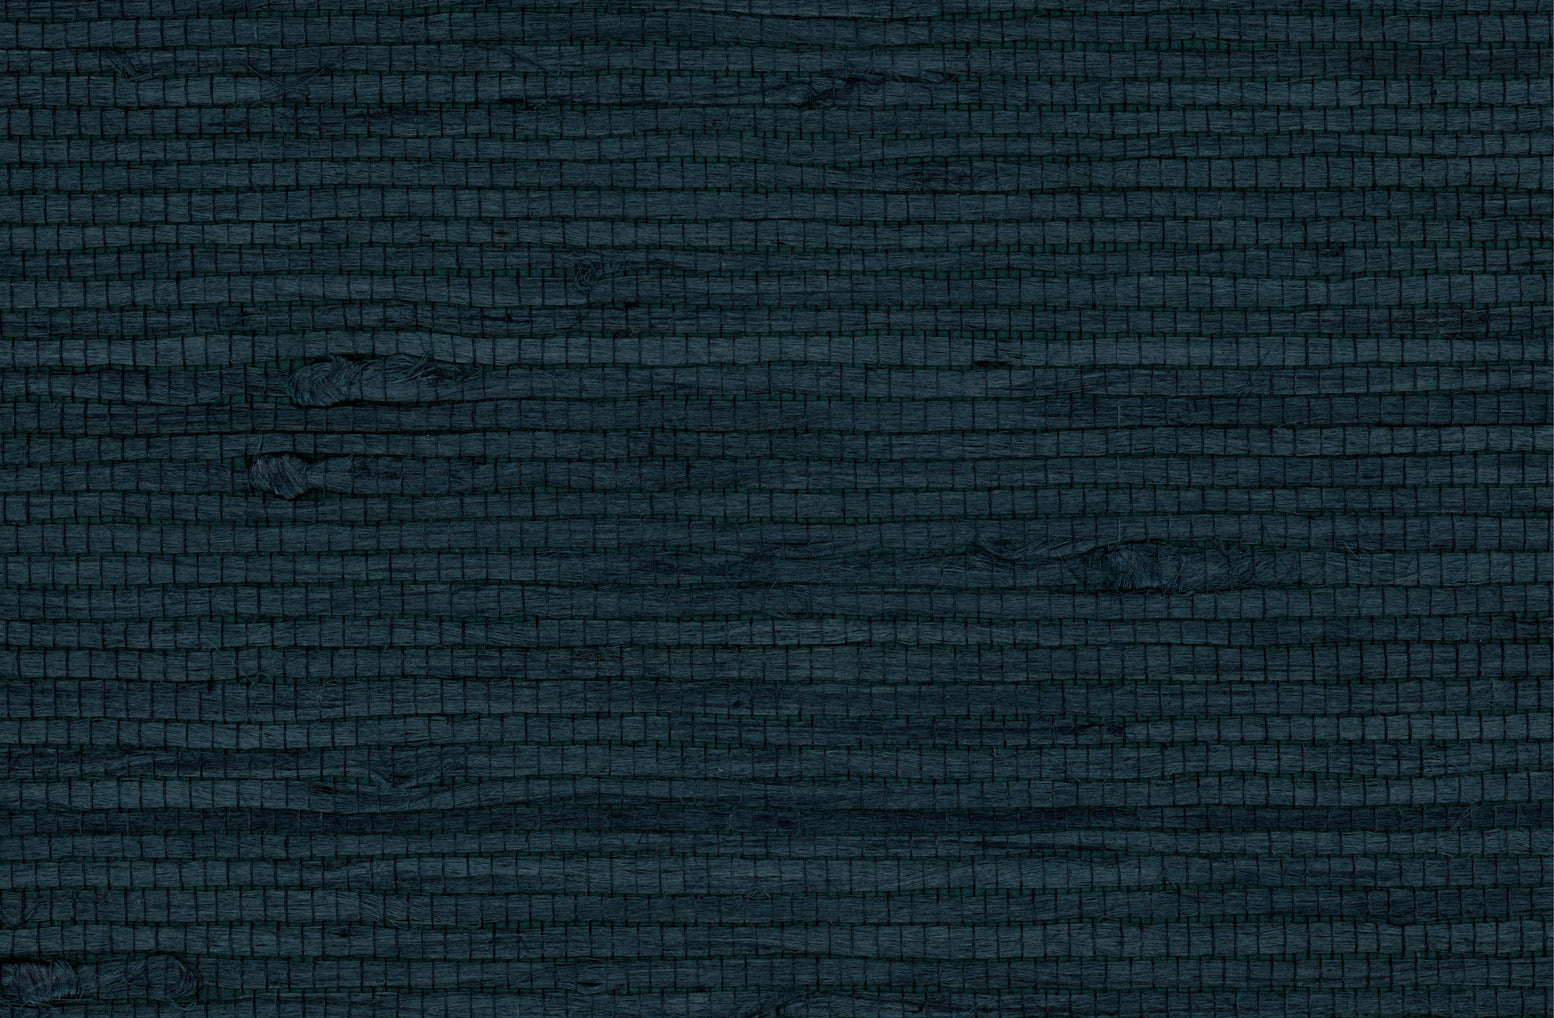 Detail of a jute grasscloth wallpaper in dark navy on a paper backing.